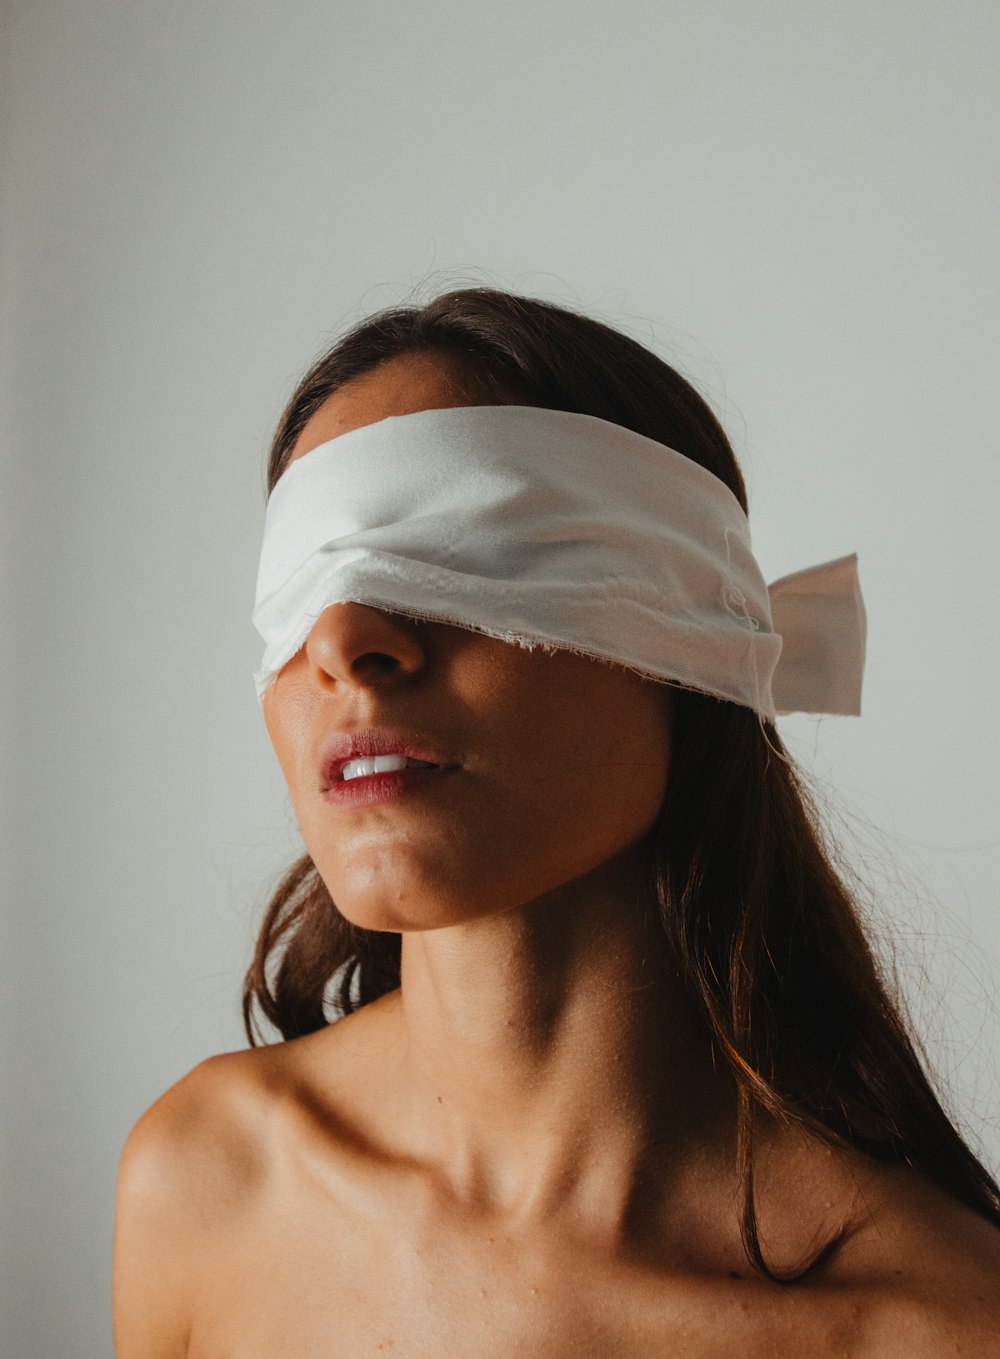 a woman with a blindfold on her head